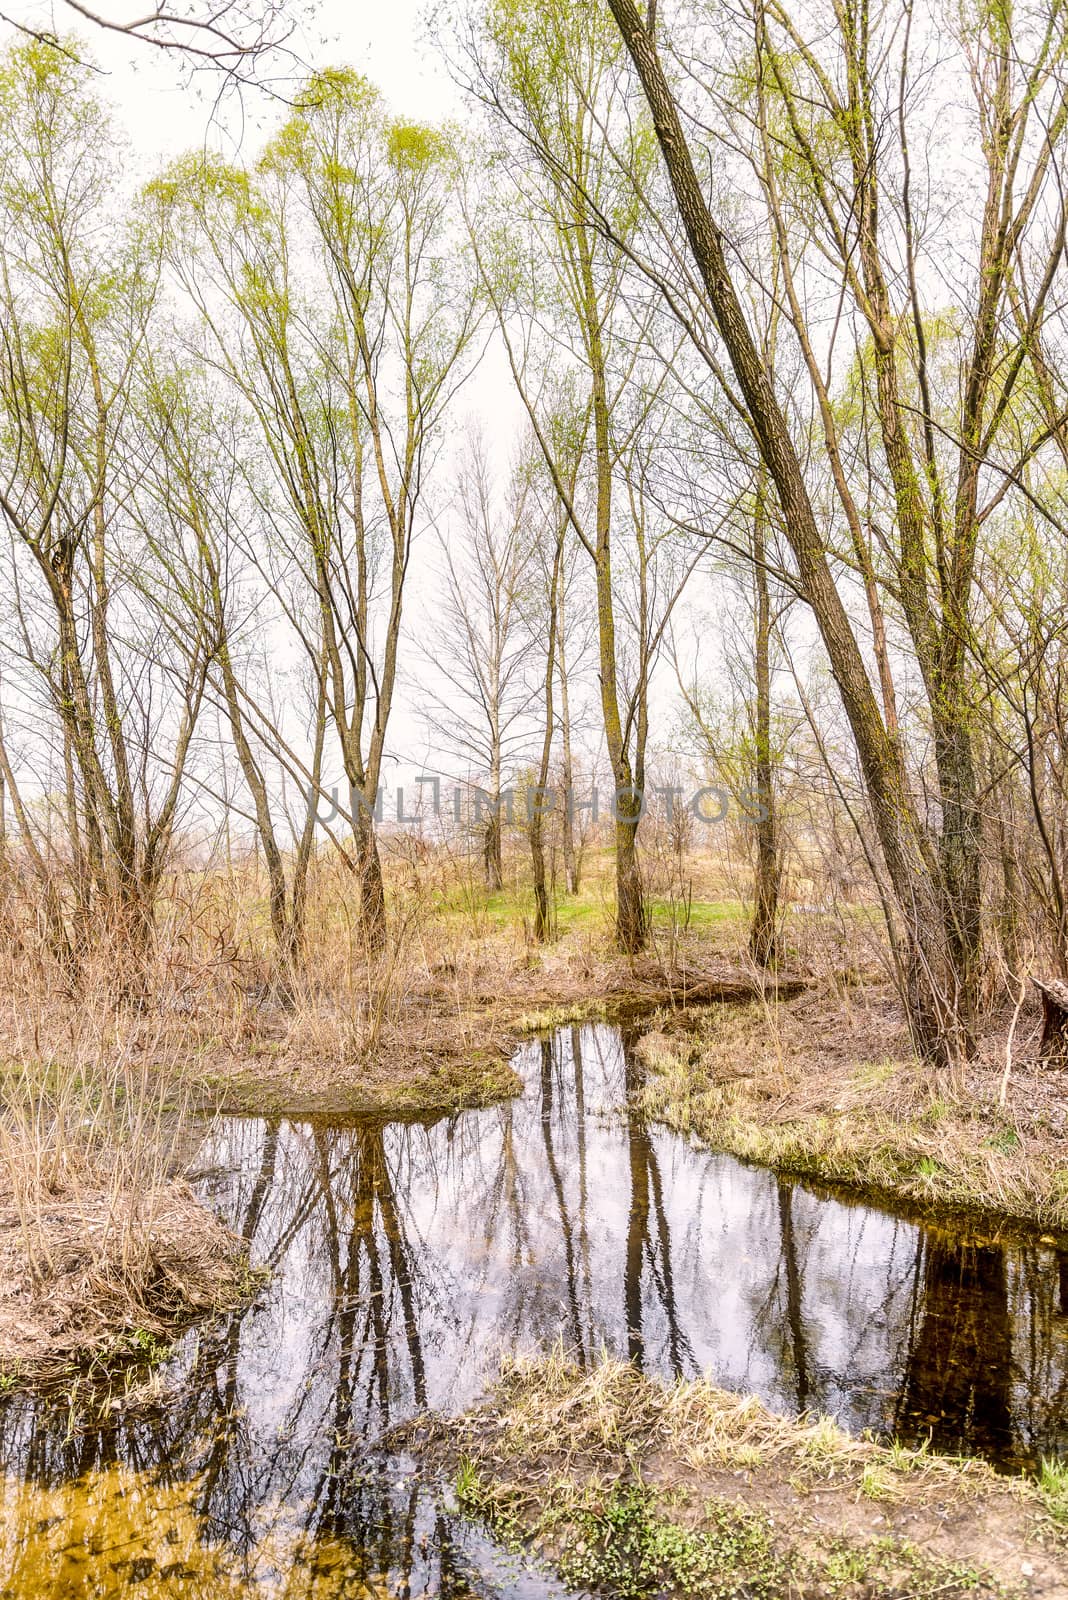 Wetland, creek and woods at the beginning of the spring. Young grass is growing and the trees reflect in the water